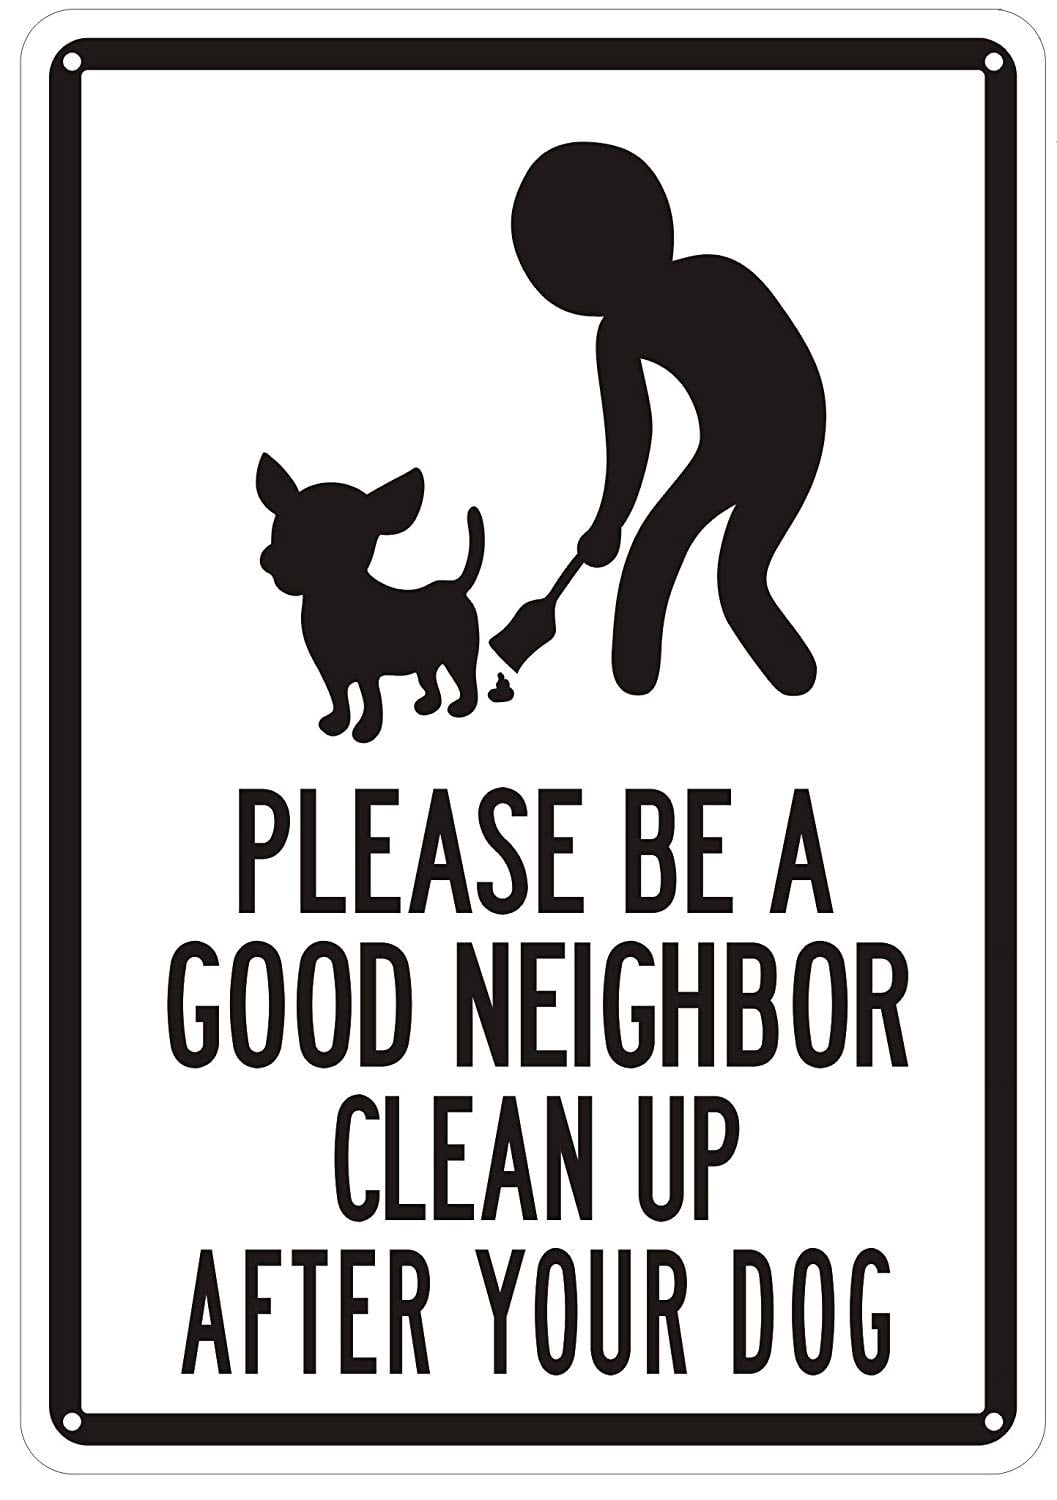 this-is-our-home-help-us-keep-it-clean-and-beautiful-please-curb-and-pick-up-after-your-dog